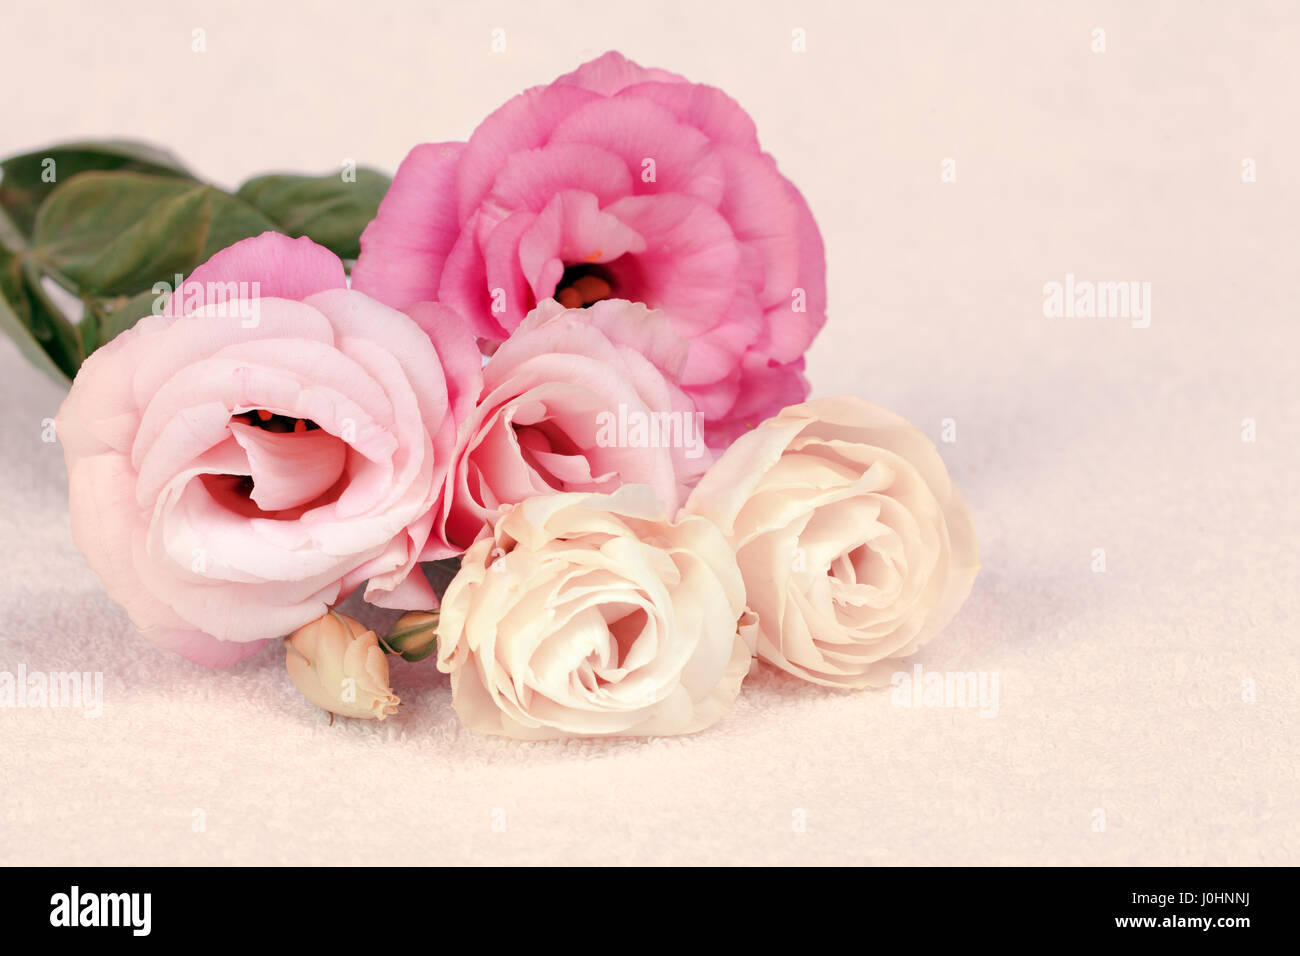 Bouquet of flowers on white blanket. Stock Photo